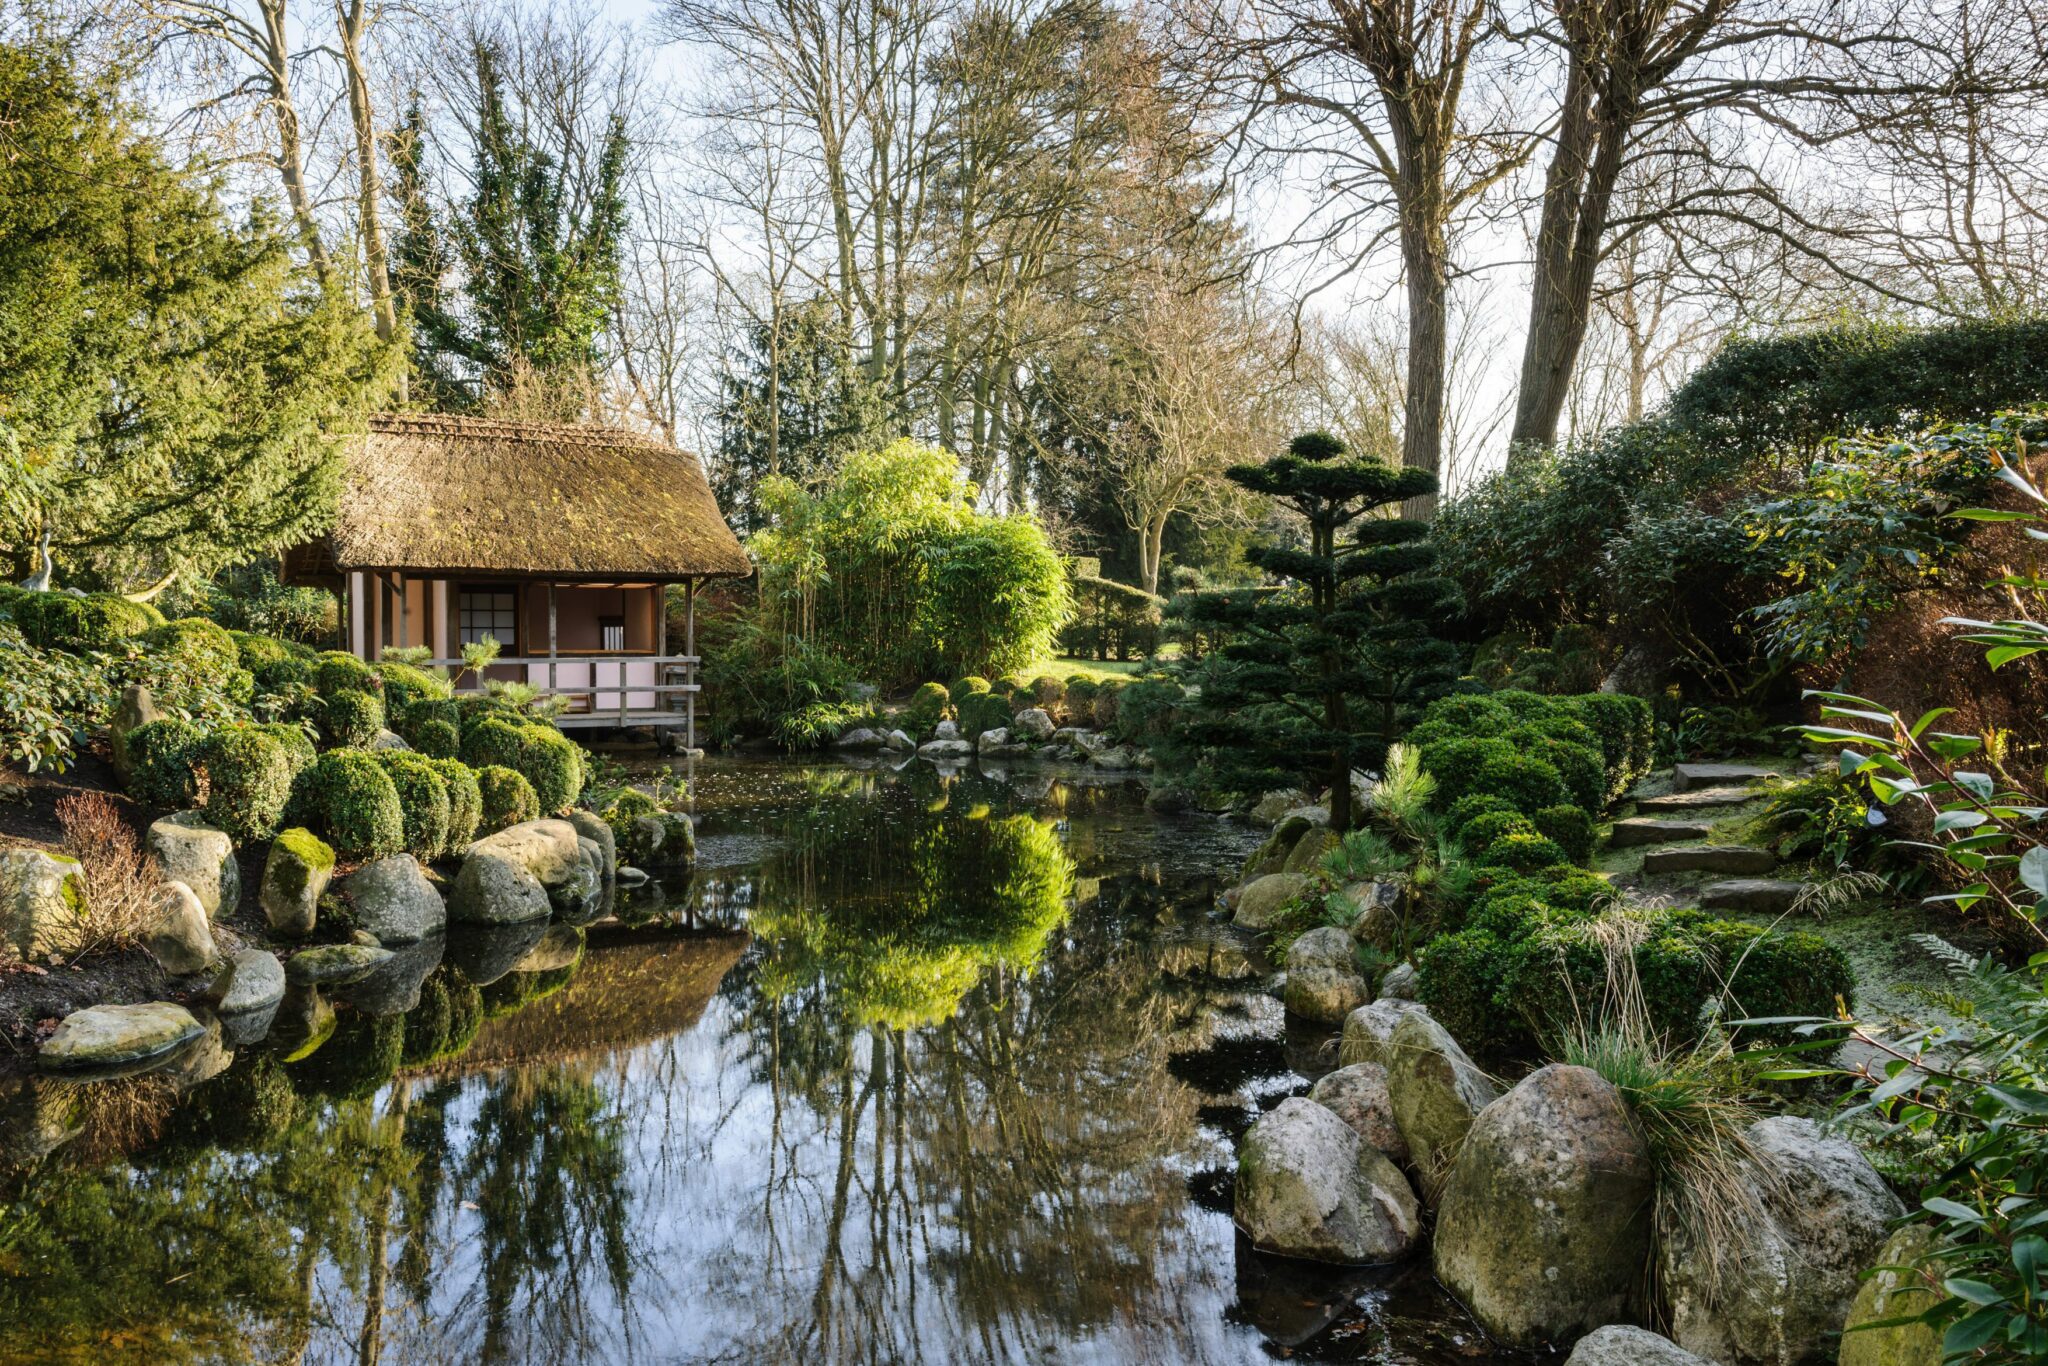 Image of an outdoor lake and water area in the gardens of Le Manoir aus Quat'Saisons with a boat house